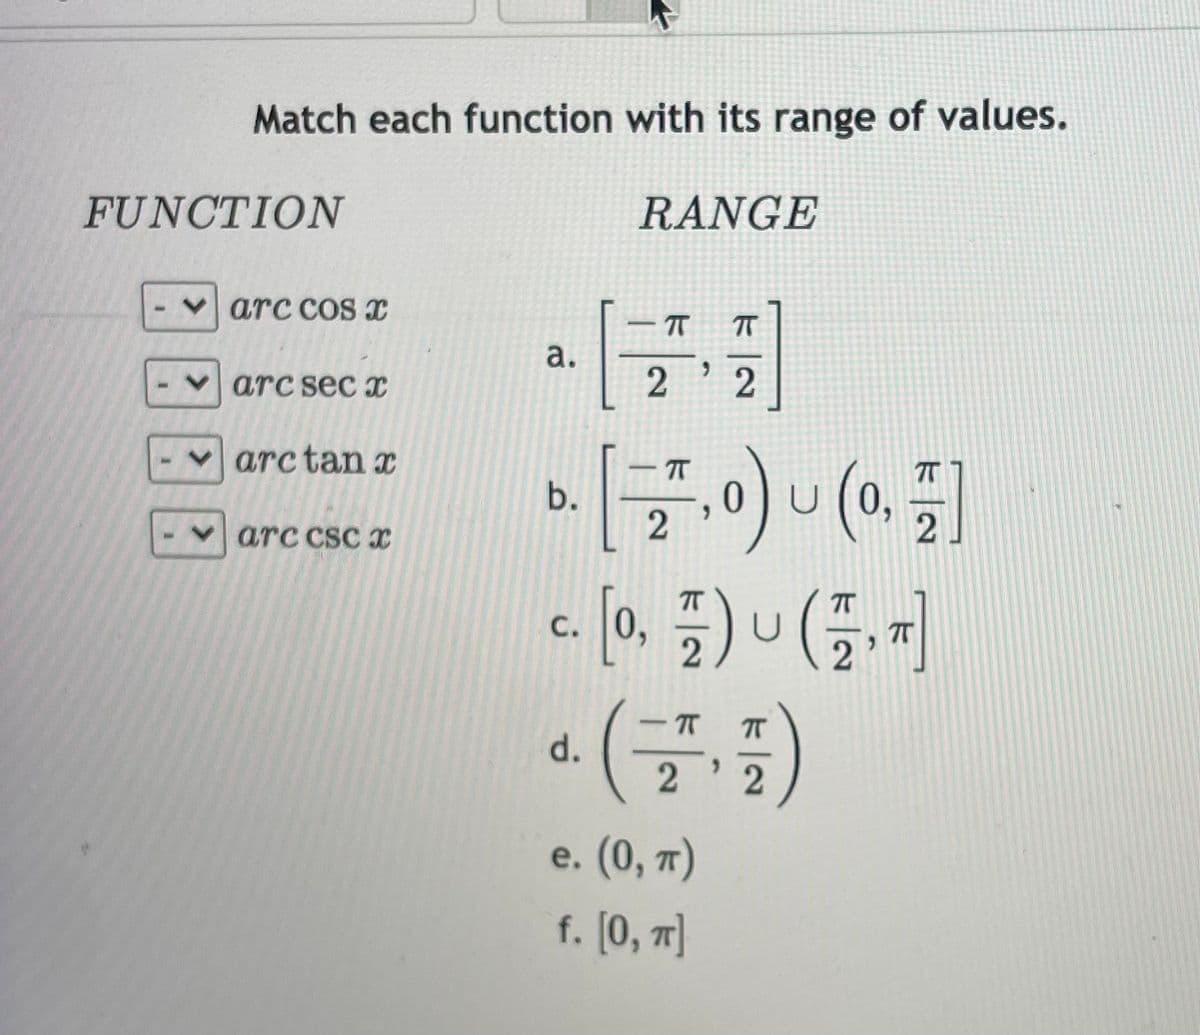 Match each function with its range of values.
FUNCTION
RANGE
V arc cos x
T
|
а.
arc sec x
V arctan x
b.
0U (0,
Varc cscx
T
T
С.
2
d.
е. (0, п)
f. [0, 7]
